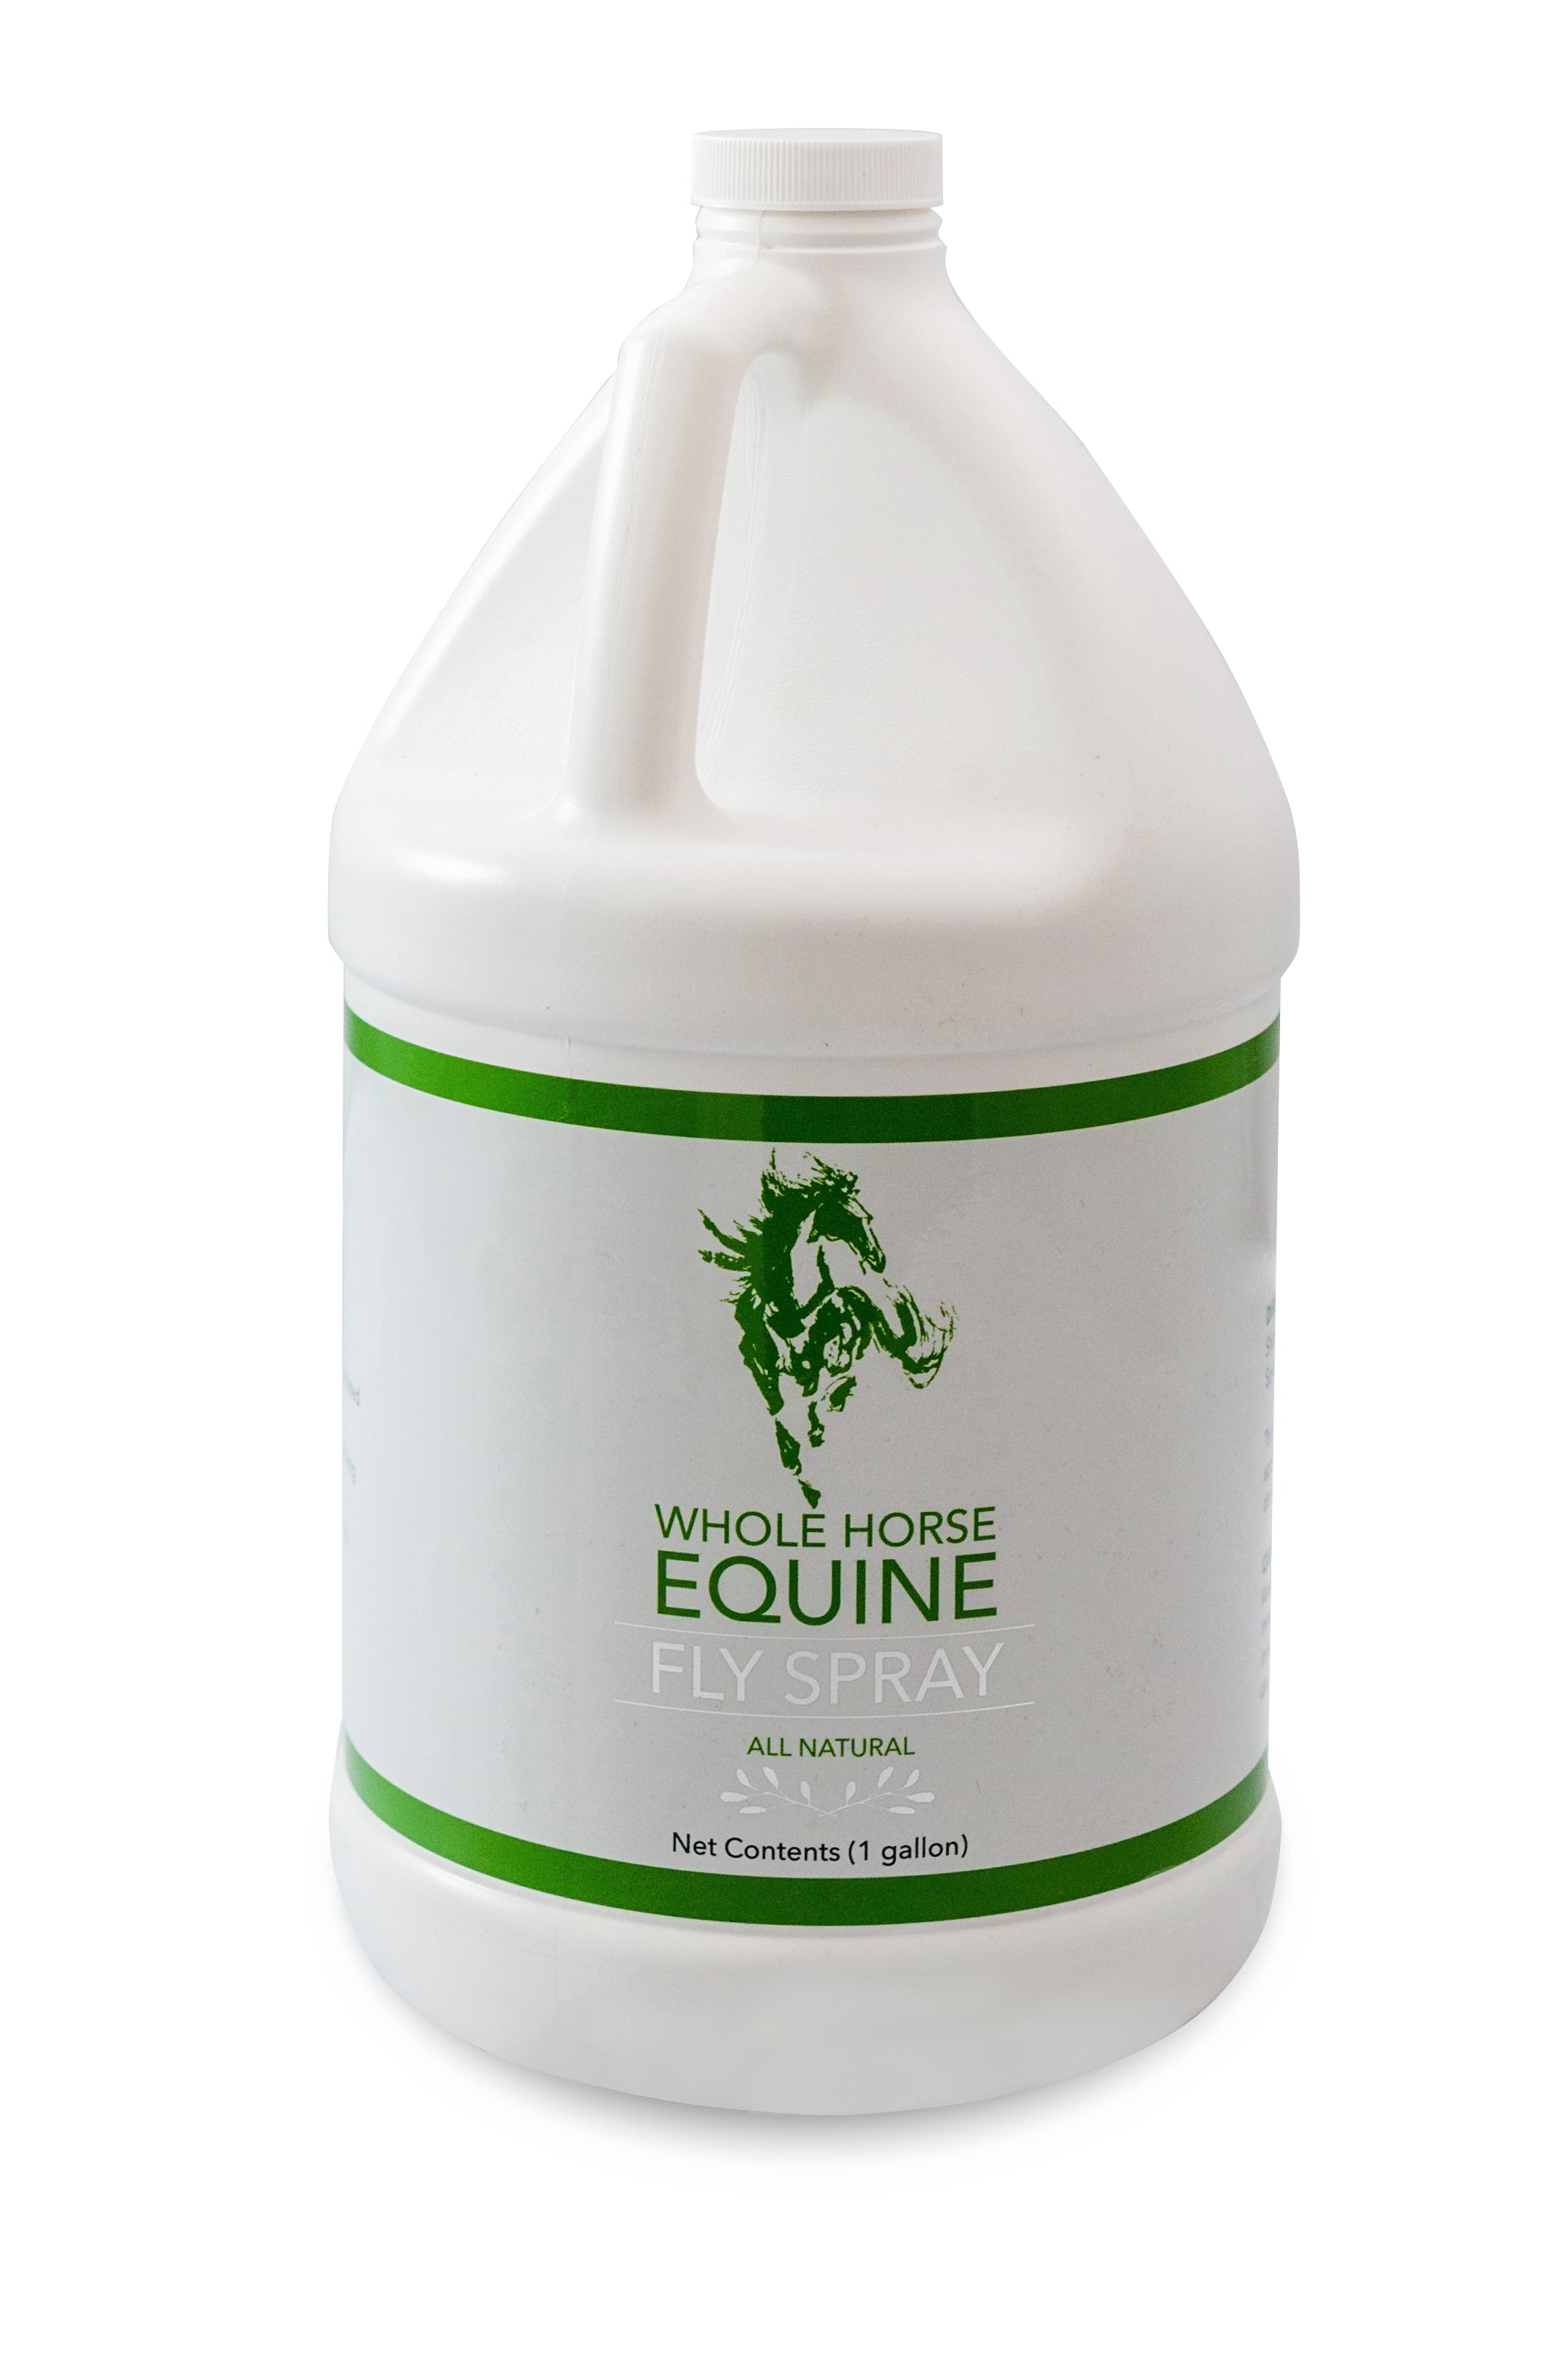 Whole Horse Equine Fly Spray